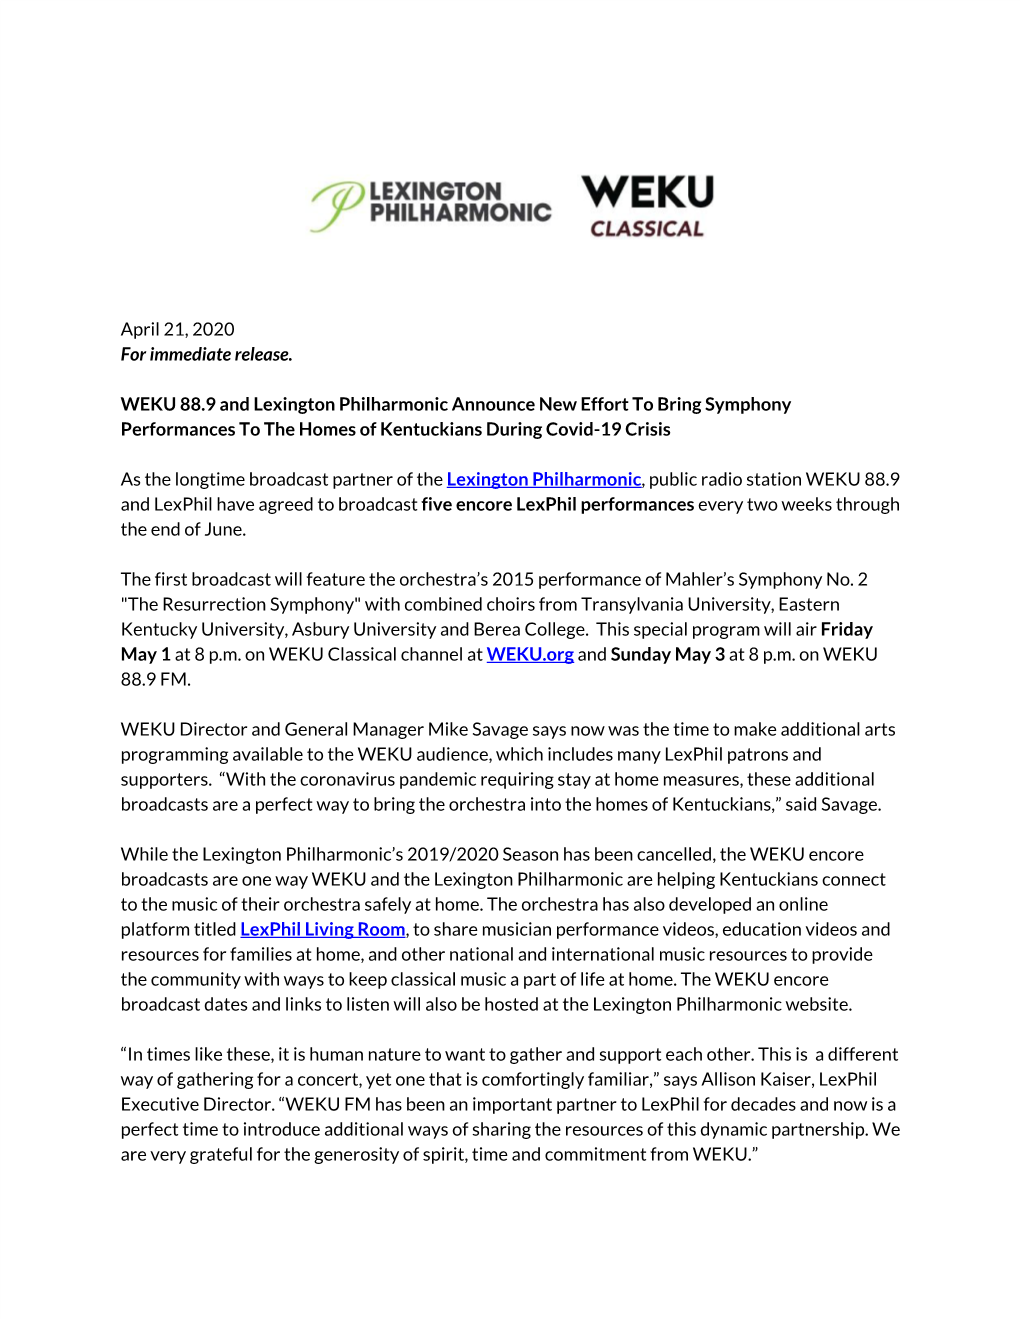 April 21, 2020 for Immediate Release. WEKU 88.9 and Lexington